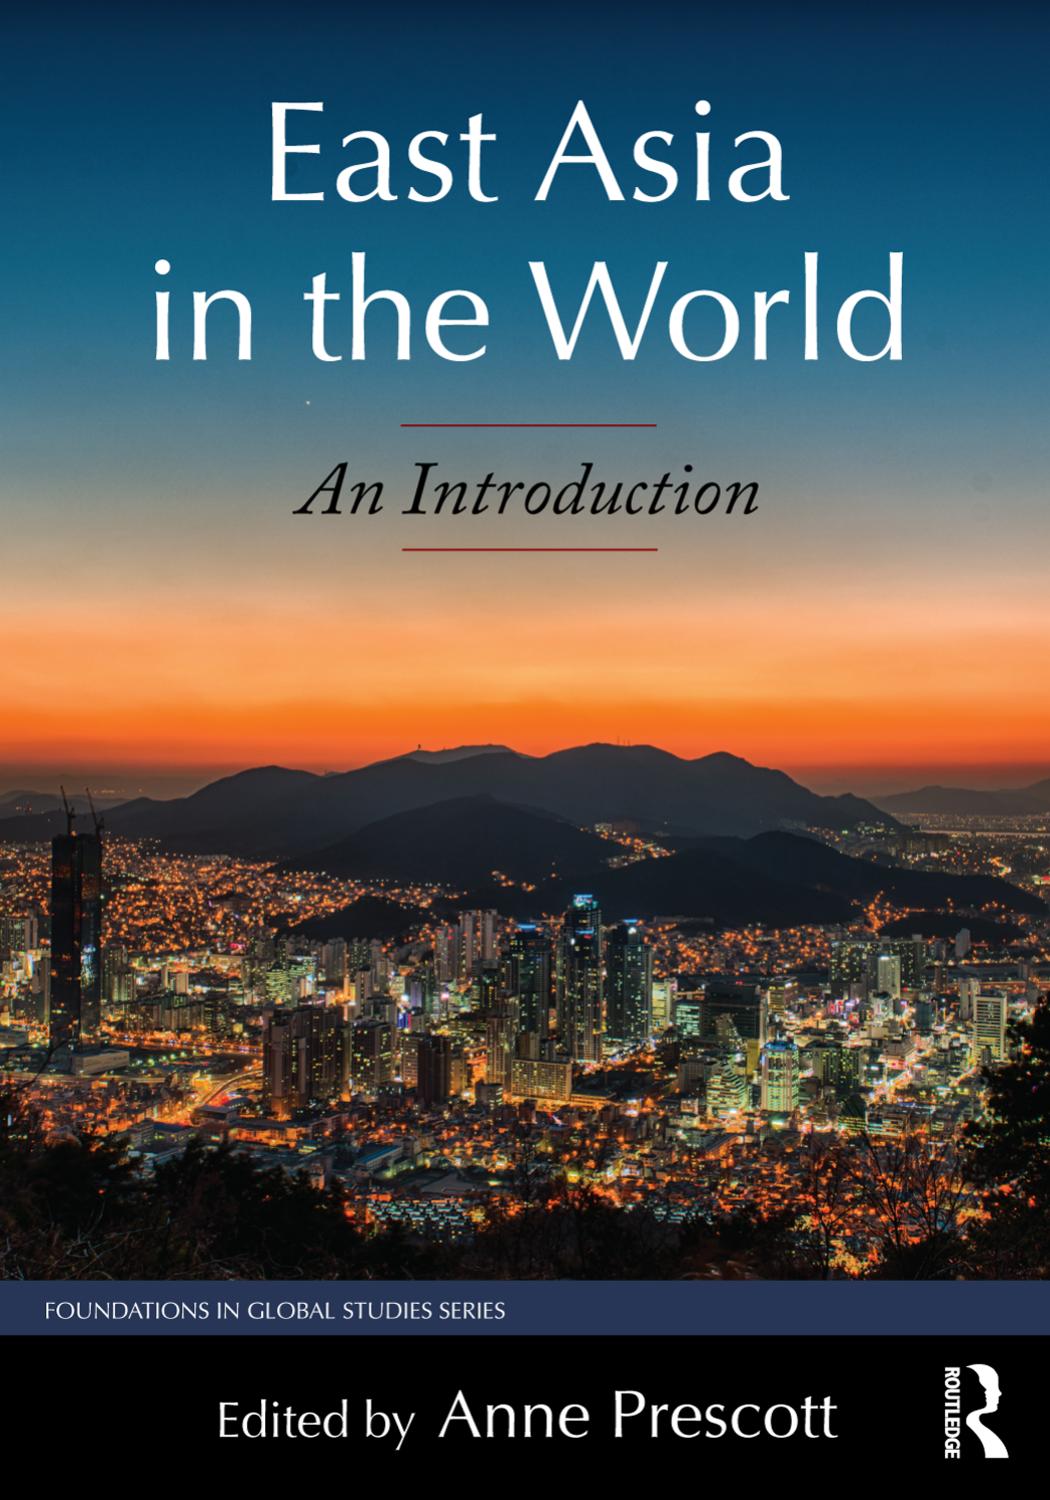 East Asia in the World by Anne Prescott